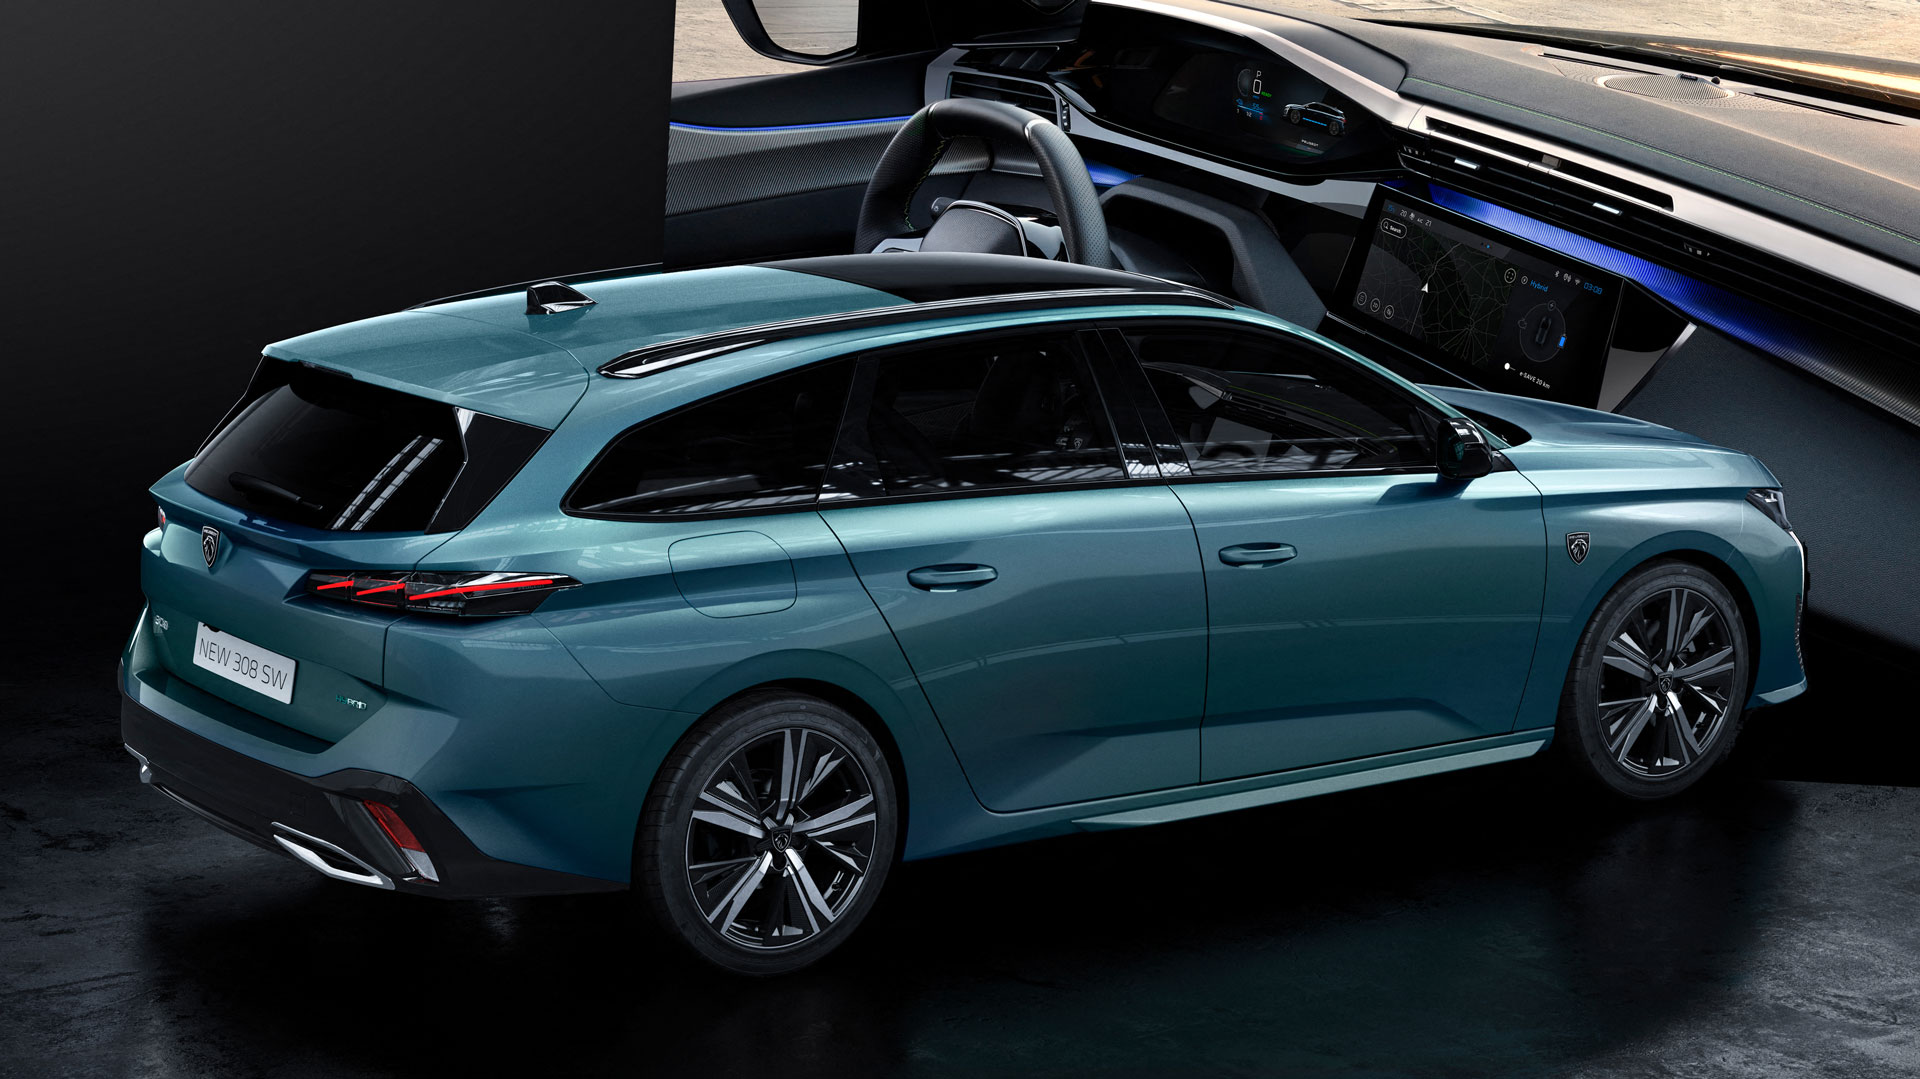 2022 Peugeot 308 SW Looks Like the Sexiest French Wagon in